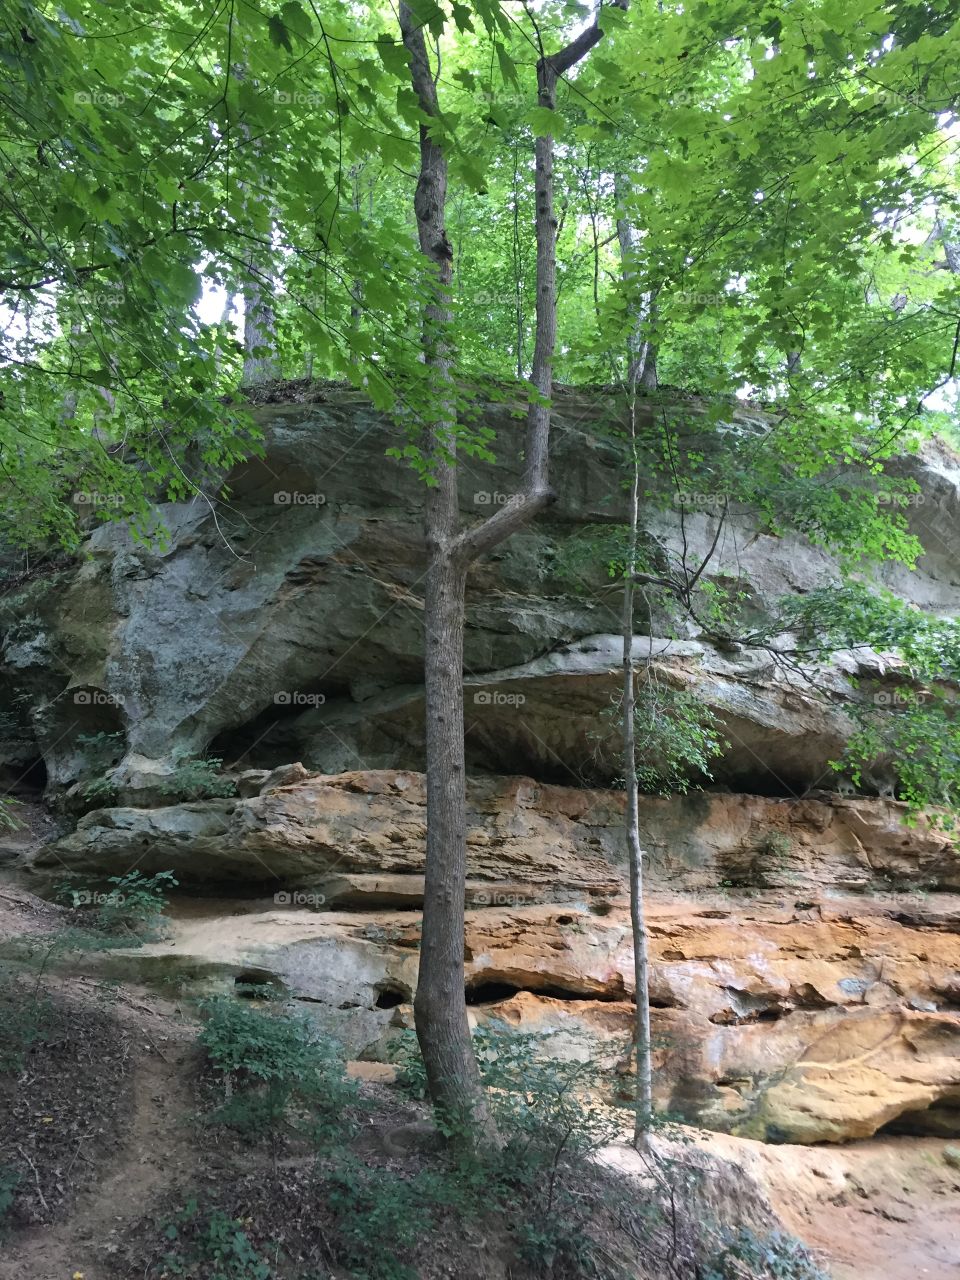 Sandstone bluff at the University of Southern Indiana